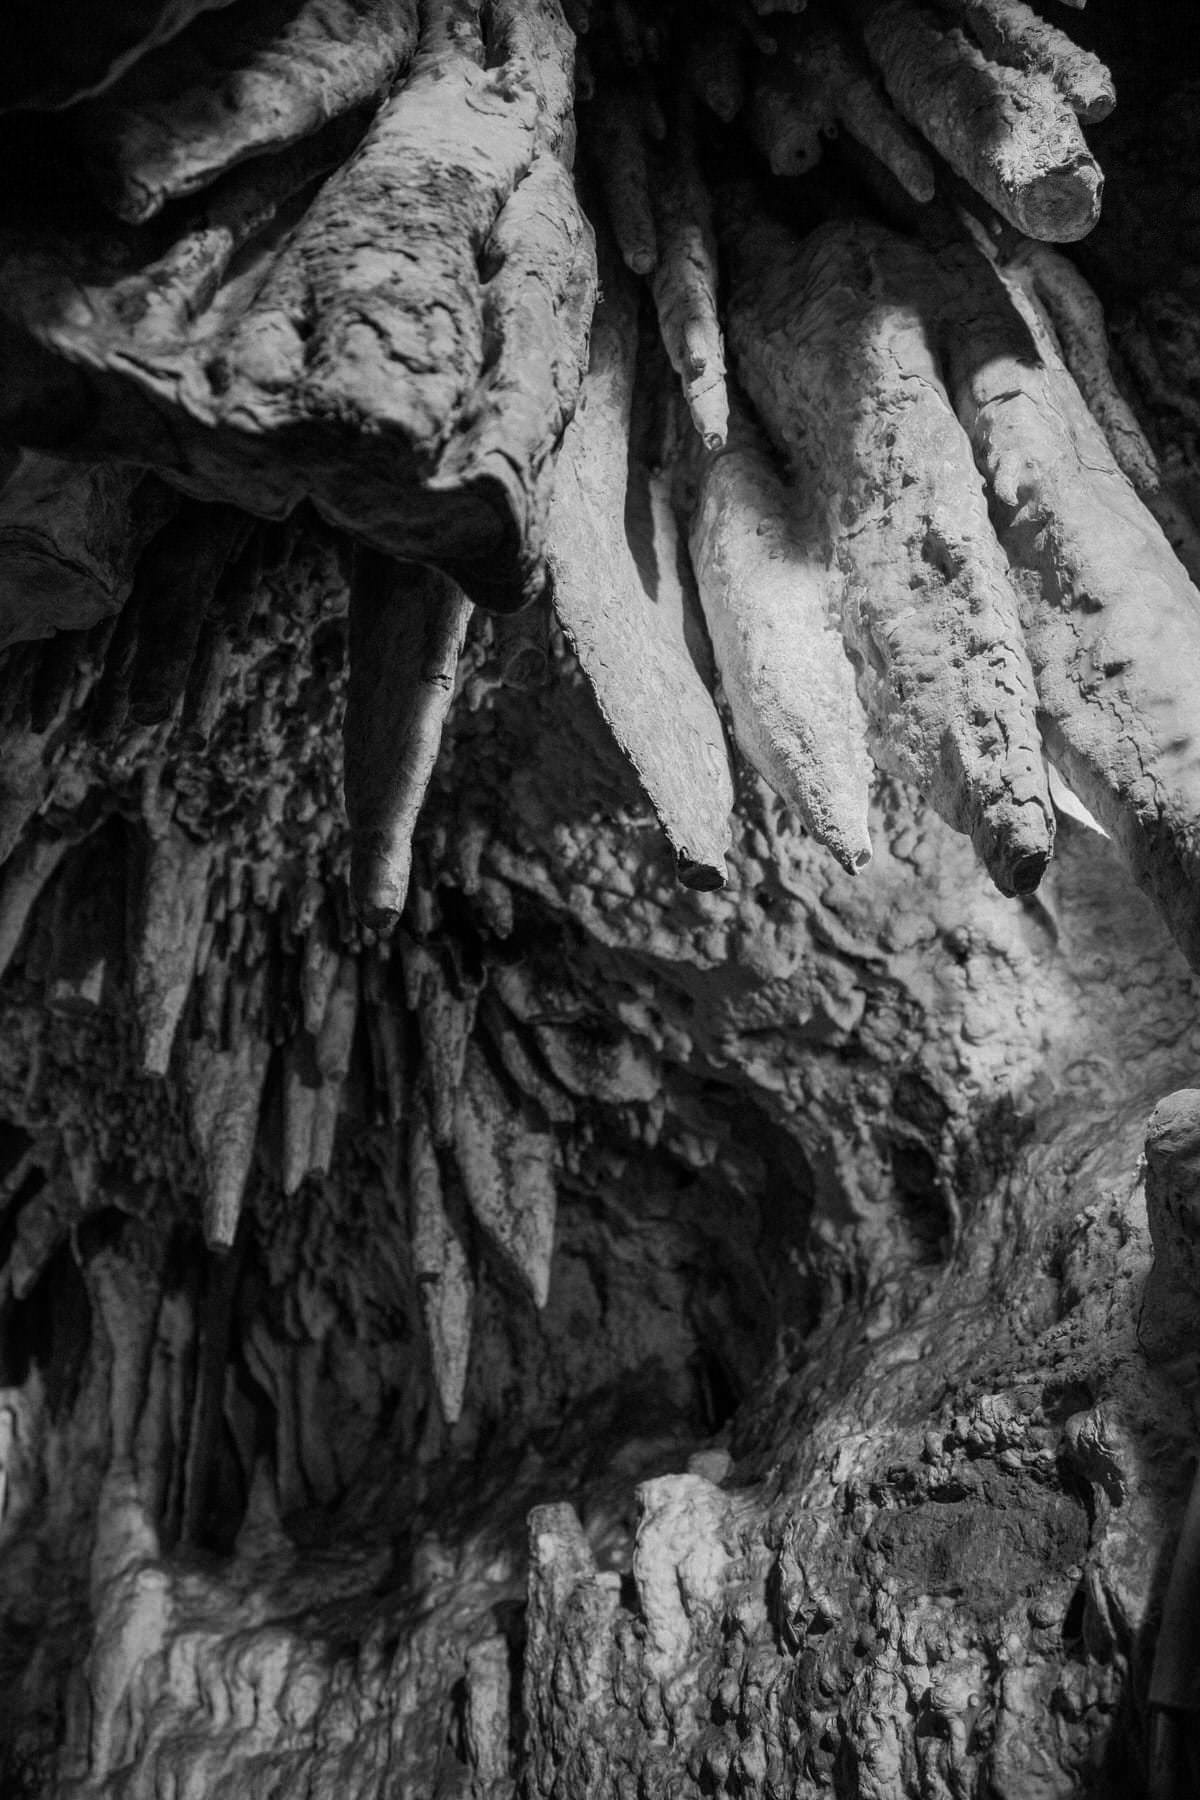 cave-of-the-mounds-national-natural-landmark-Wisconsin-black-and-white-fine-art-photography-by-Studio-L-photographer-Laura-Schneider-_6024